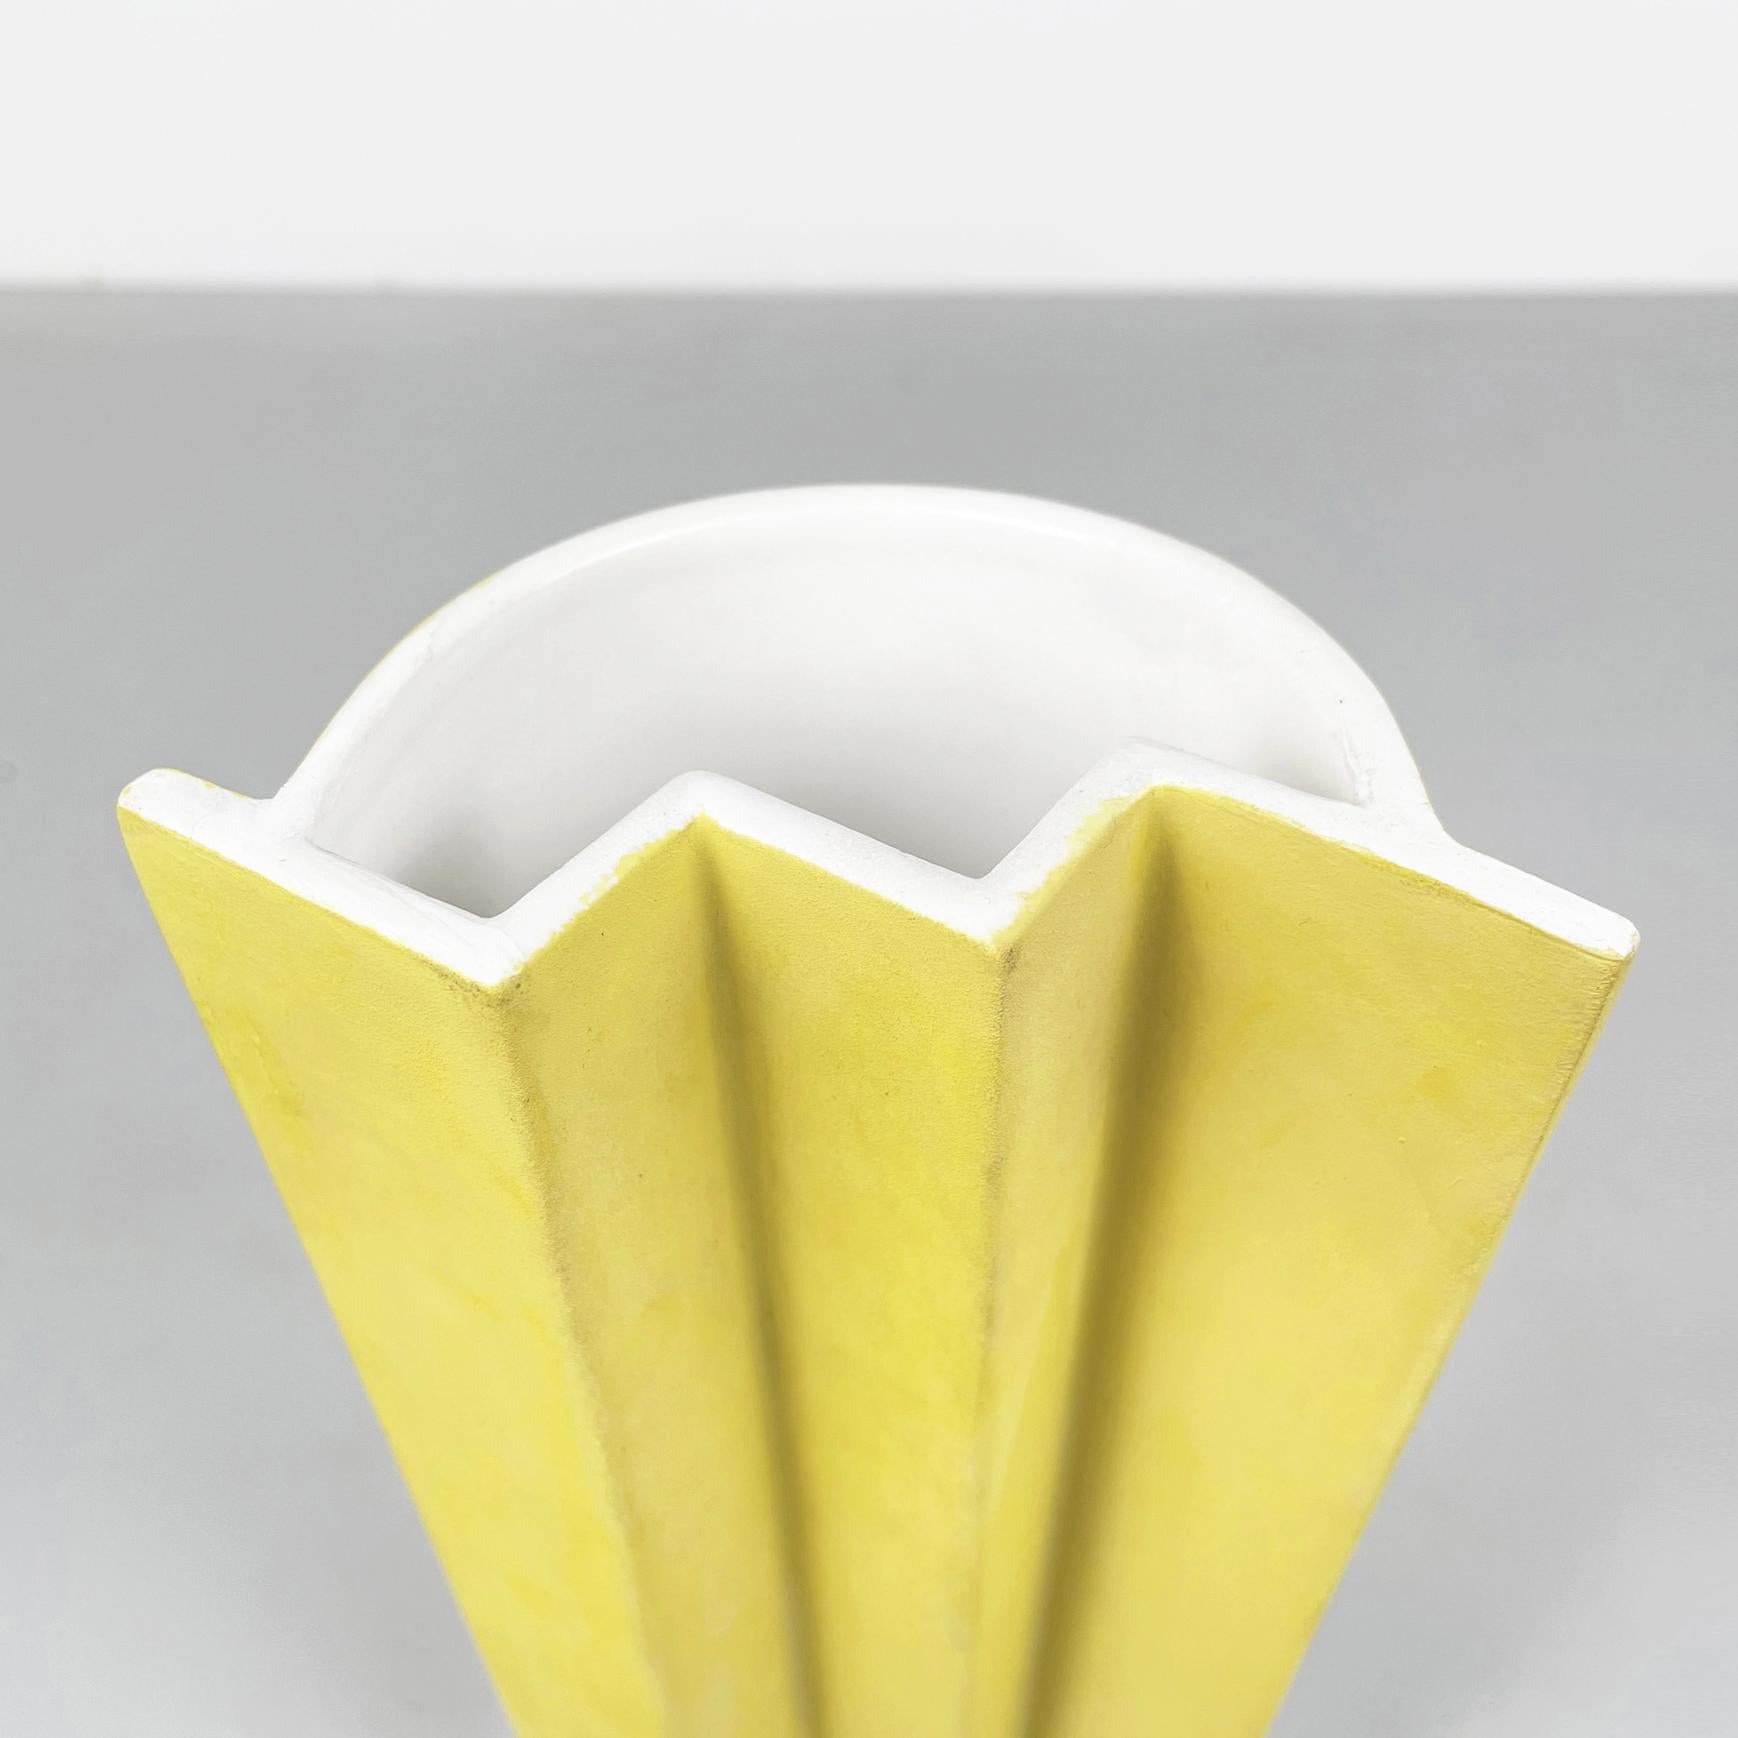 Italian Modern Yellow Ceramic Vase ET1 by Ettore Sottsass for A. Sarri, 1990s For Sale 2